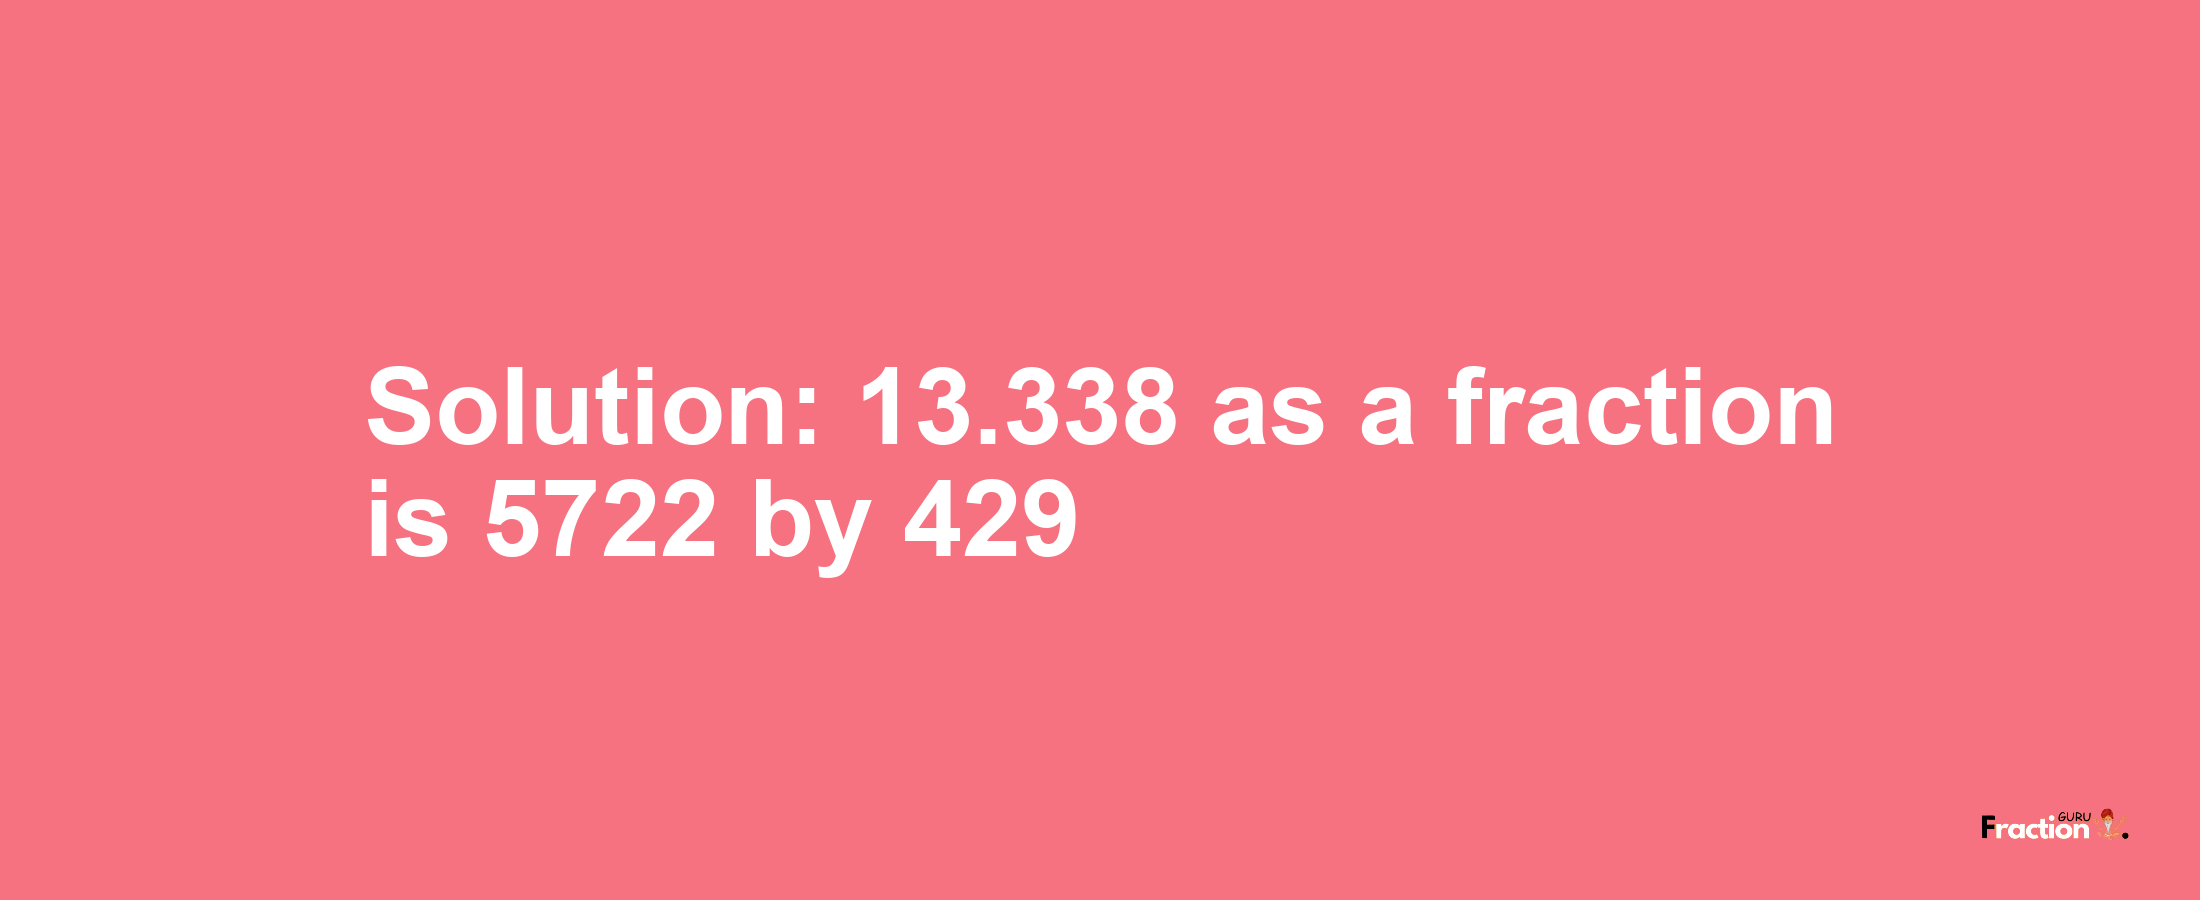 Solution:13.338 as a fraction is 5722/429